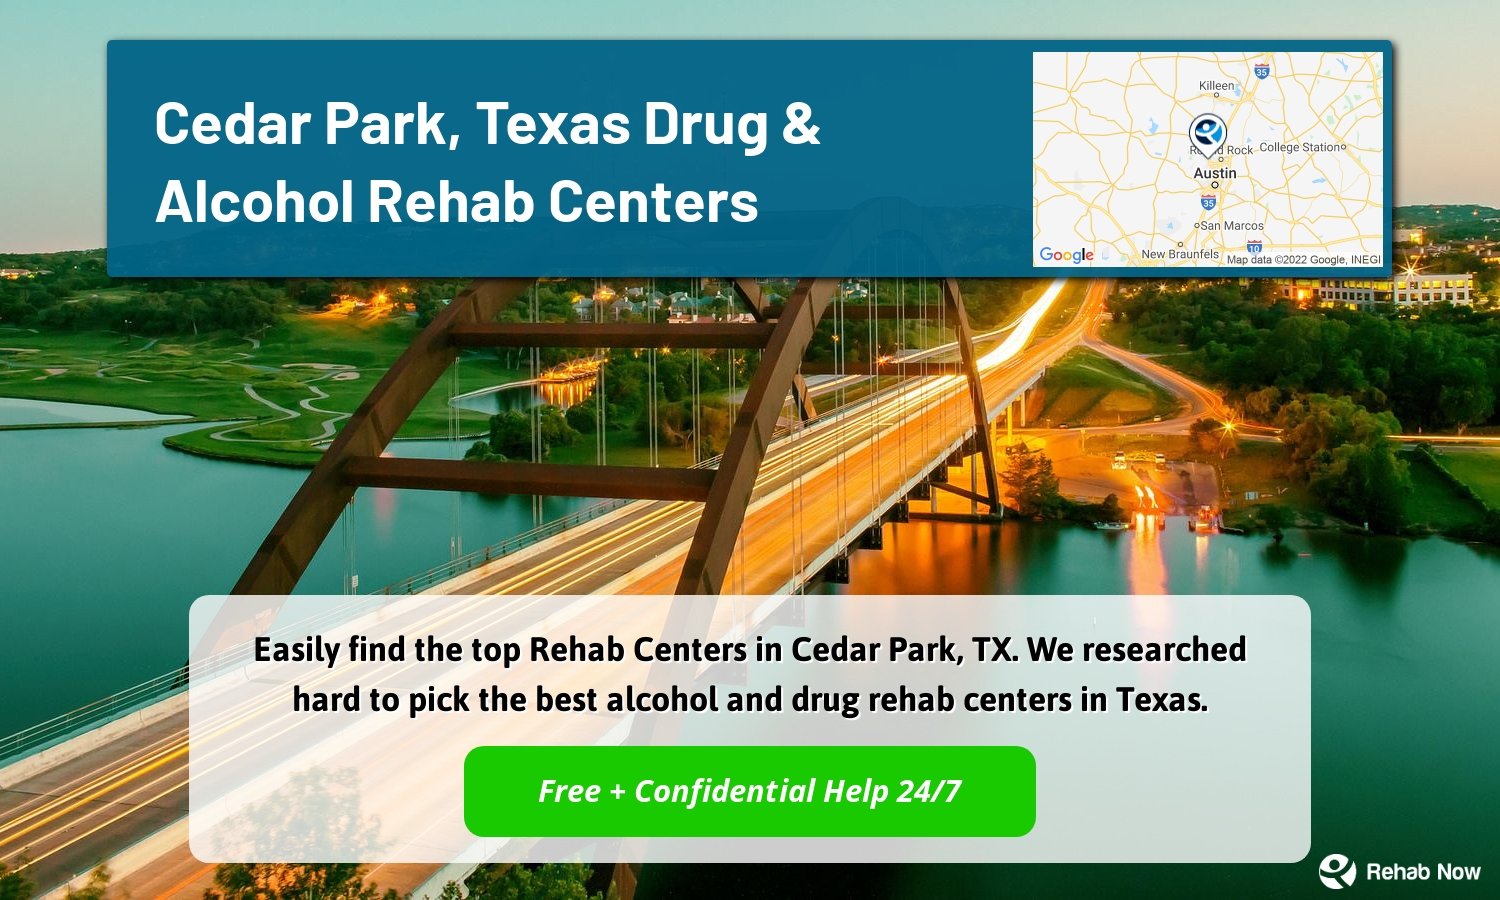 Easily find the top Rehab Centers in Cedar Park, TX. We researched hard to pick the best alcohol and drug rehab centers in Texas.